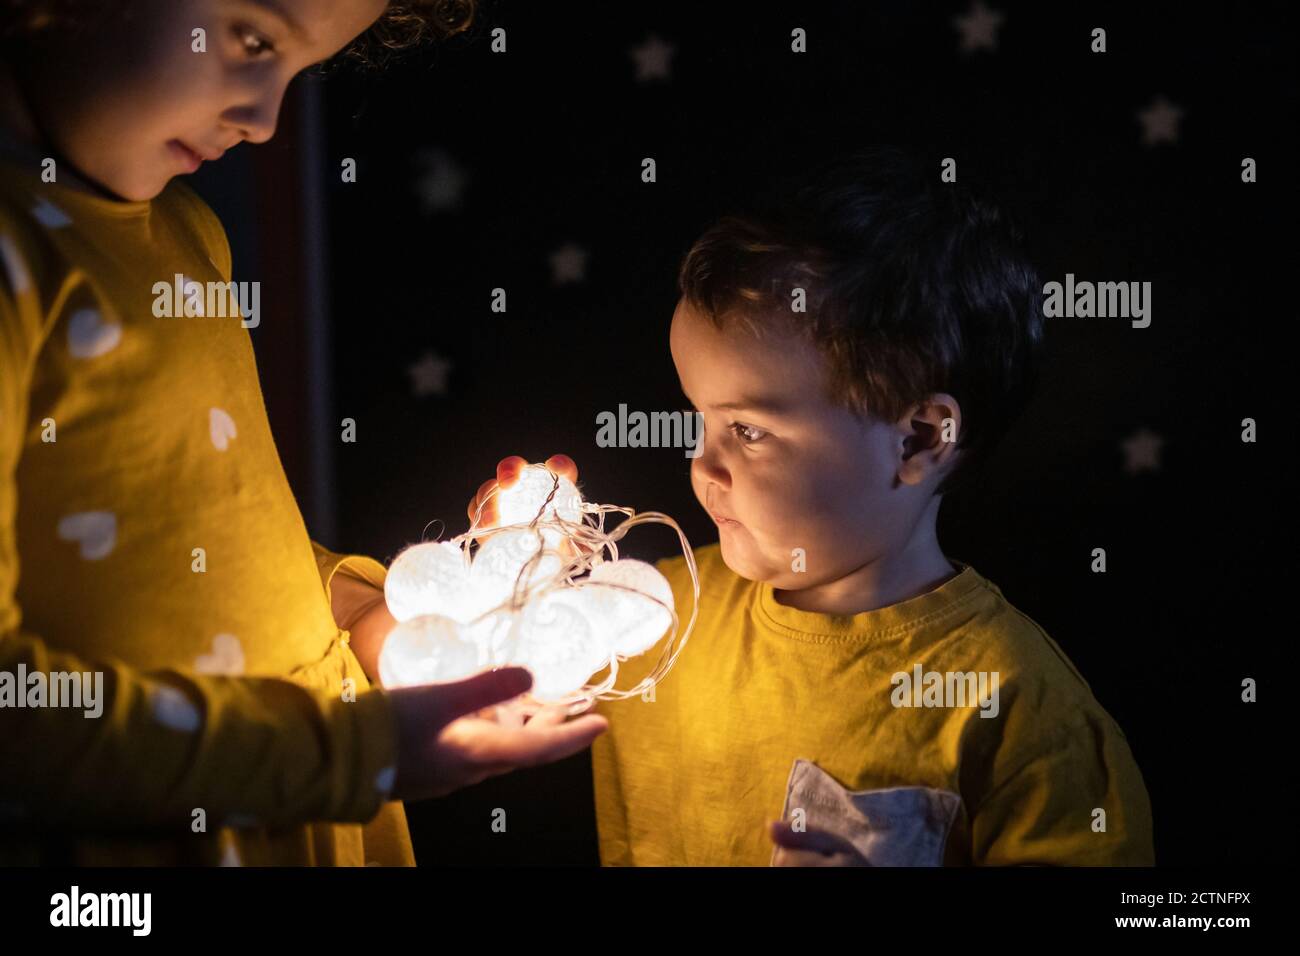 Side view of curious siblings in pajamas standing in dark room with illuminated garland Stock Photo